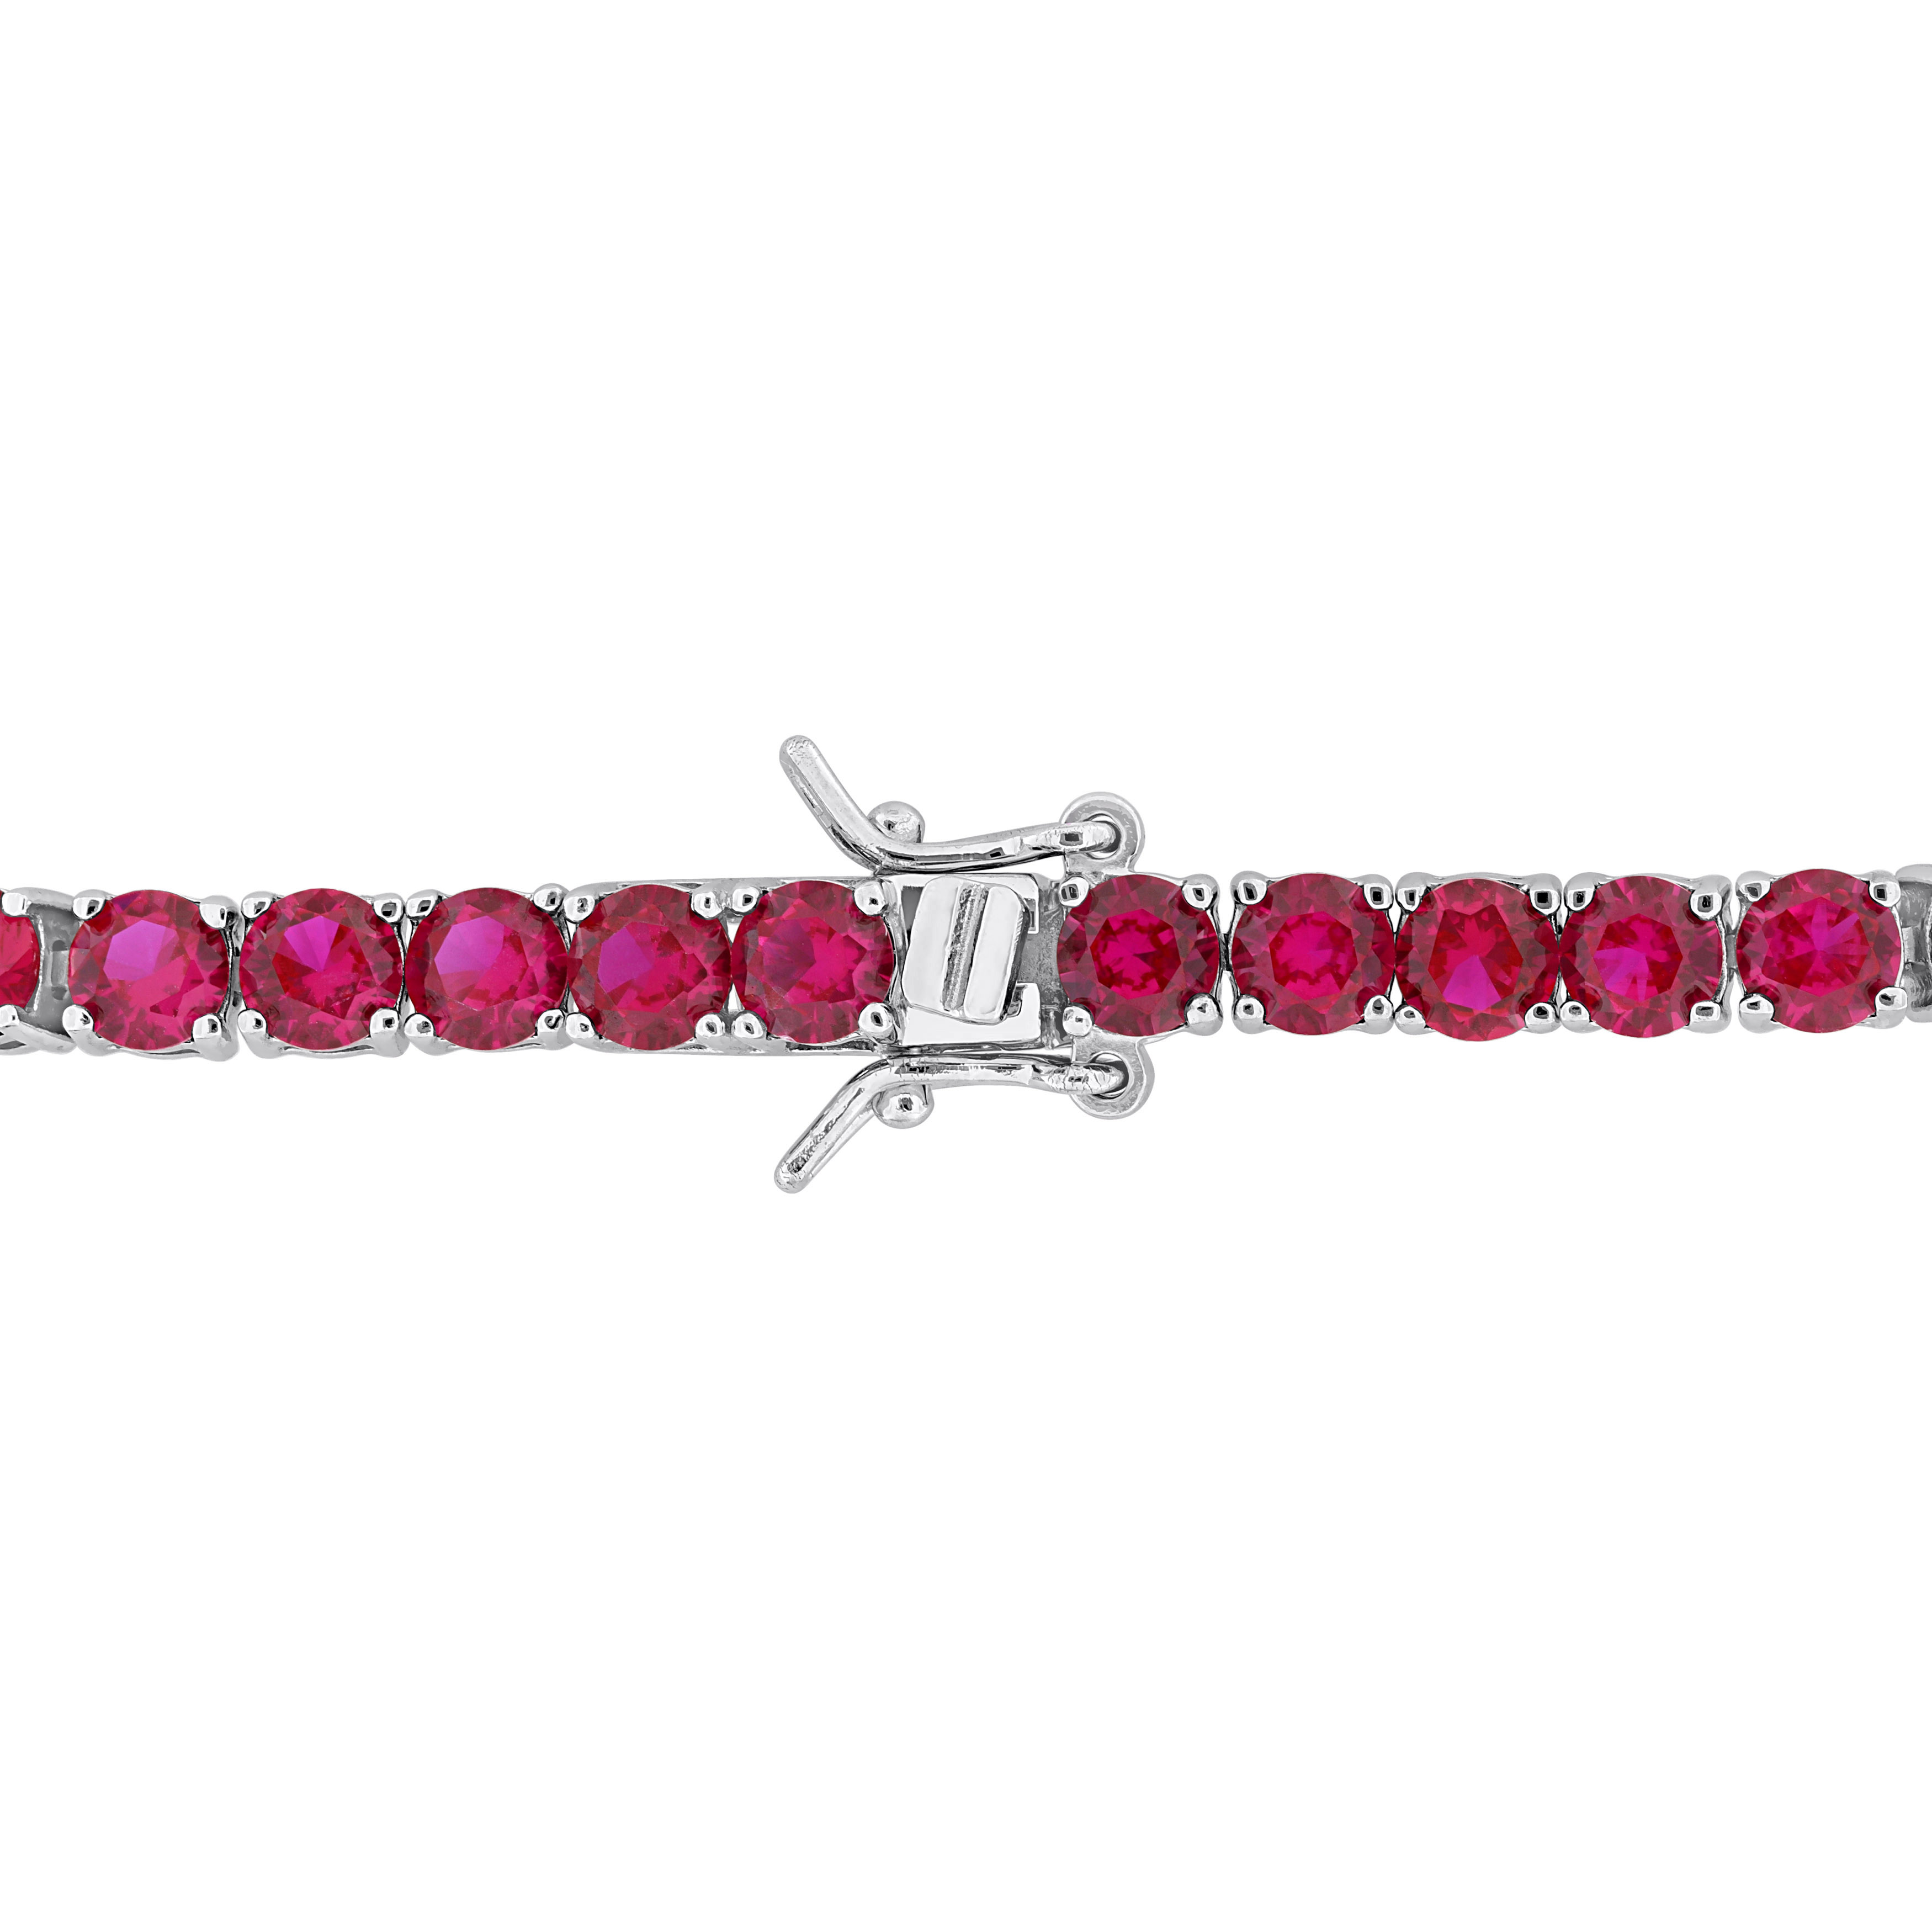 14 1/2 CT TGW Created Ruby Tennis Bracelet with Sterling Silver Safety Clasp - 7.25 in.